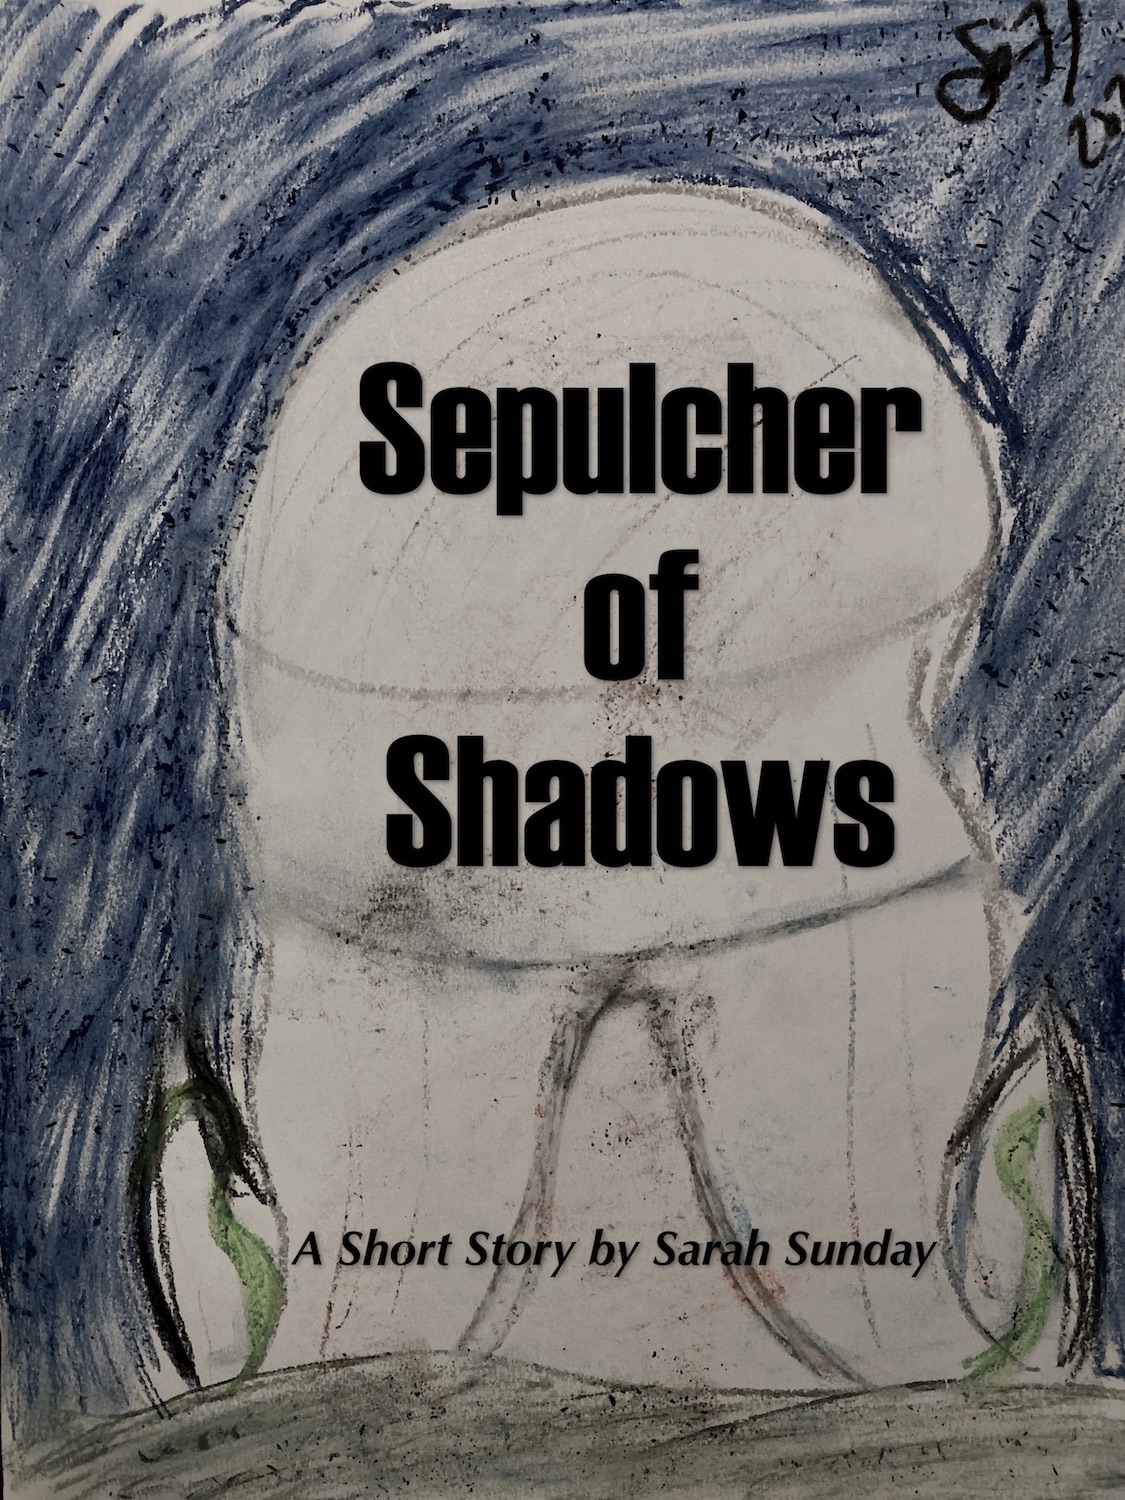 Sepulcher of Shadows: A Short Story following The Madness of Light